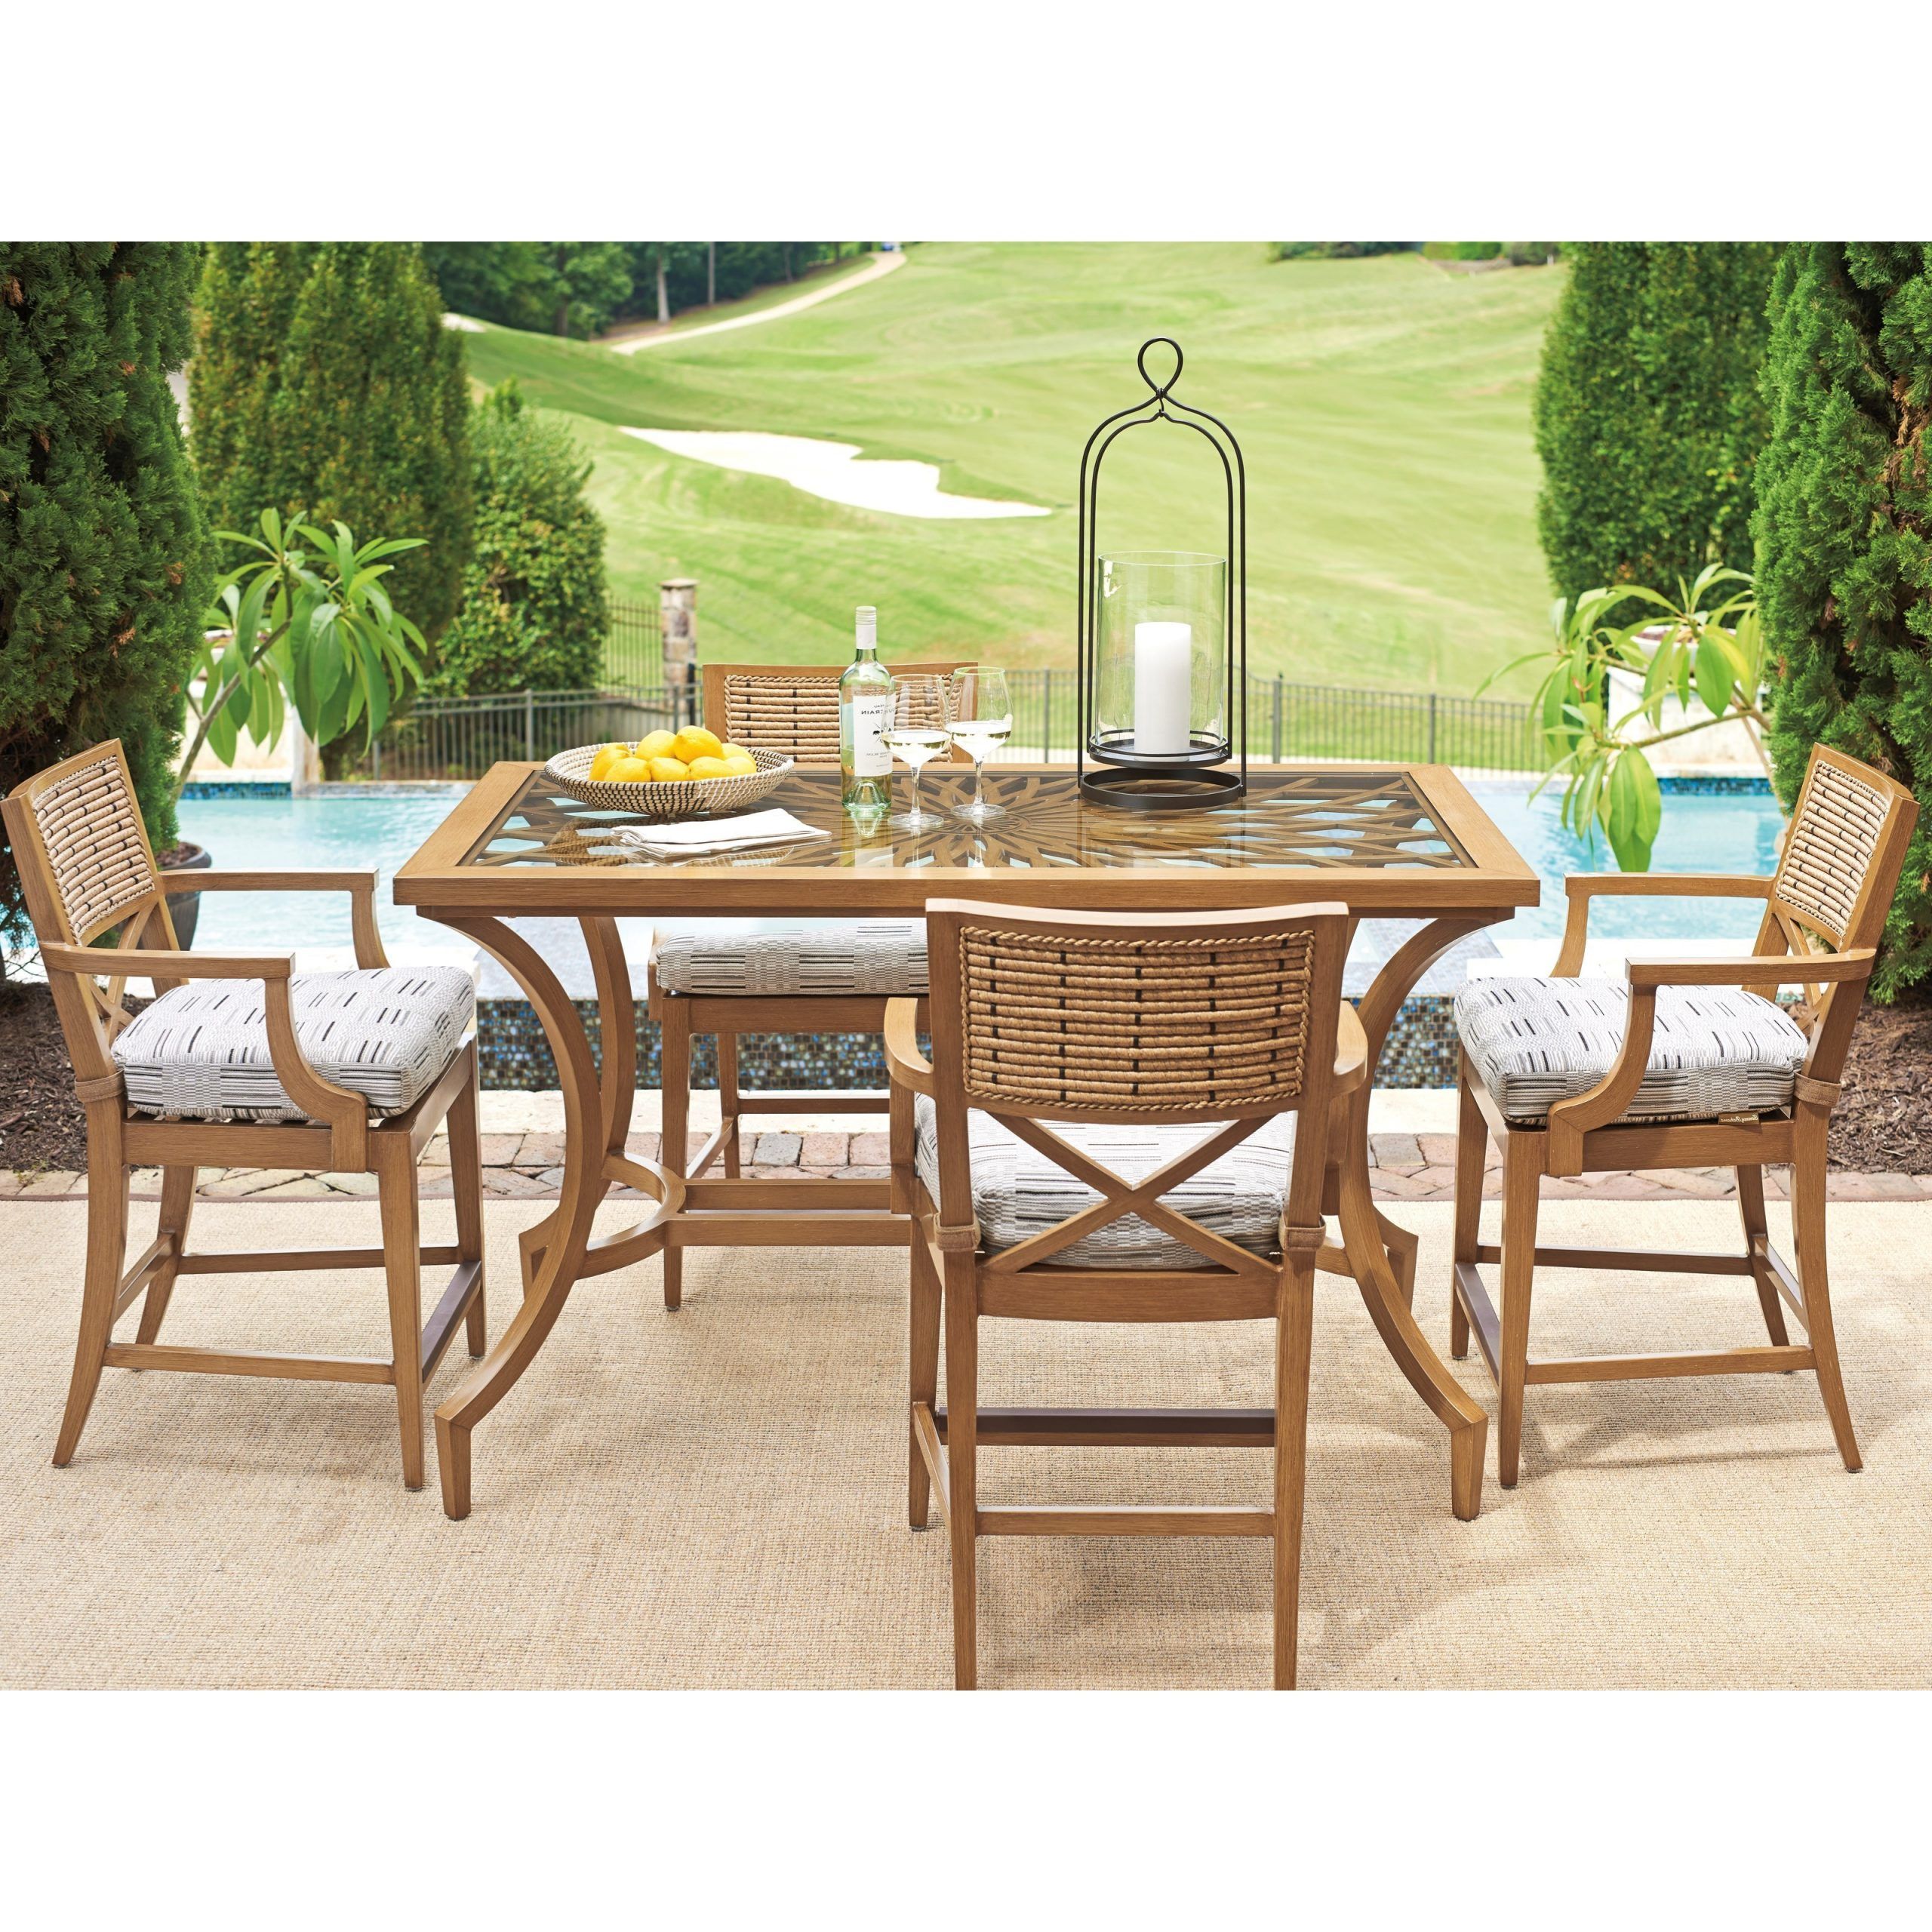 Tommy Bahama Outdoor Living Los Altos Valley View 5 Piece Outdoor In Well Known 5 Piece Cafe Dining Sets (View 12 of 15)